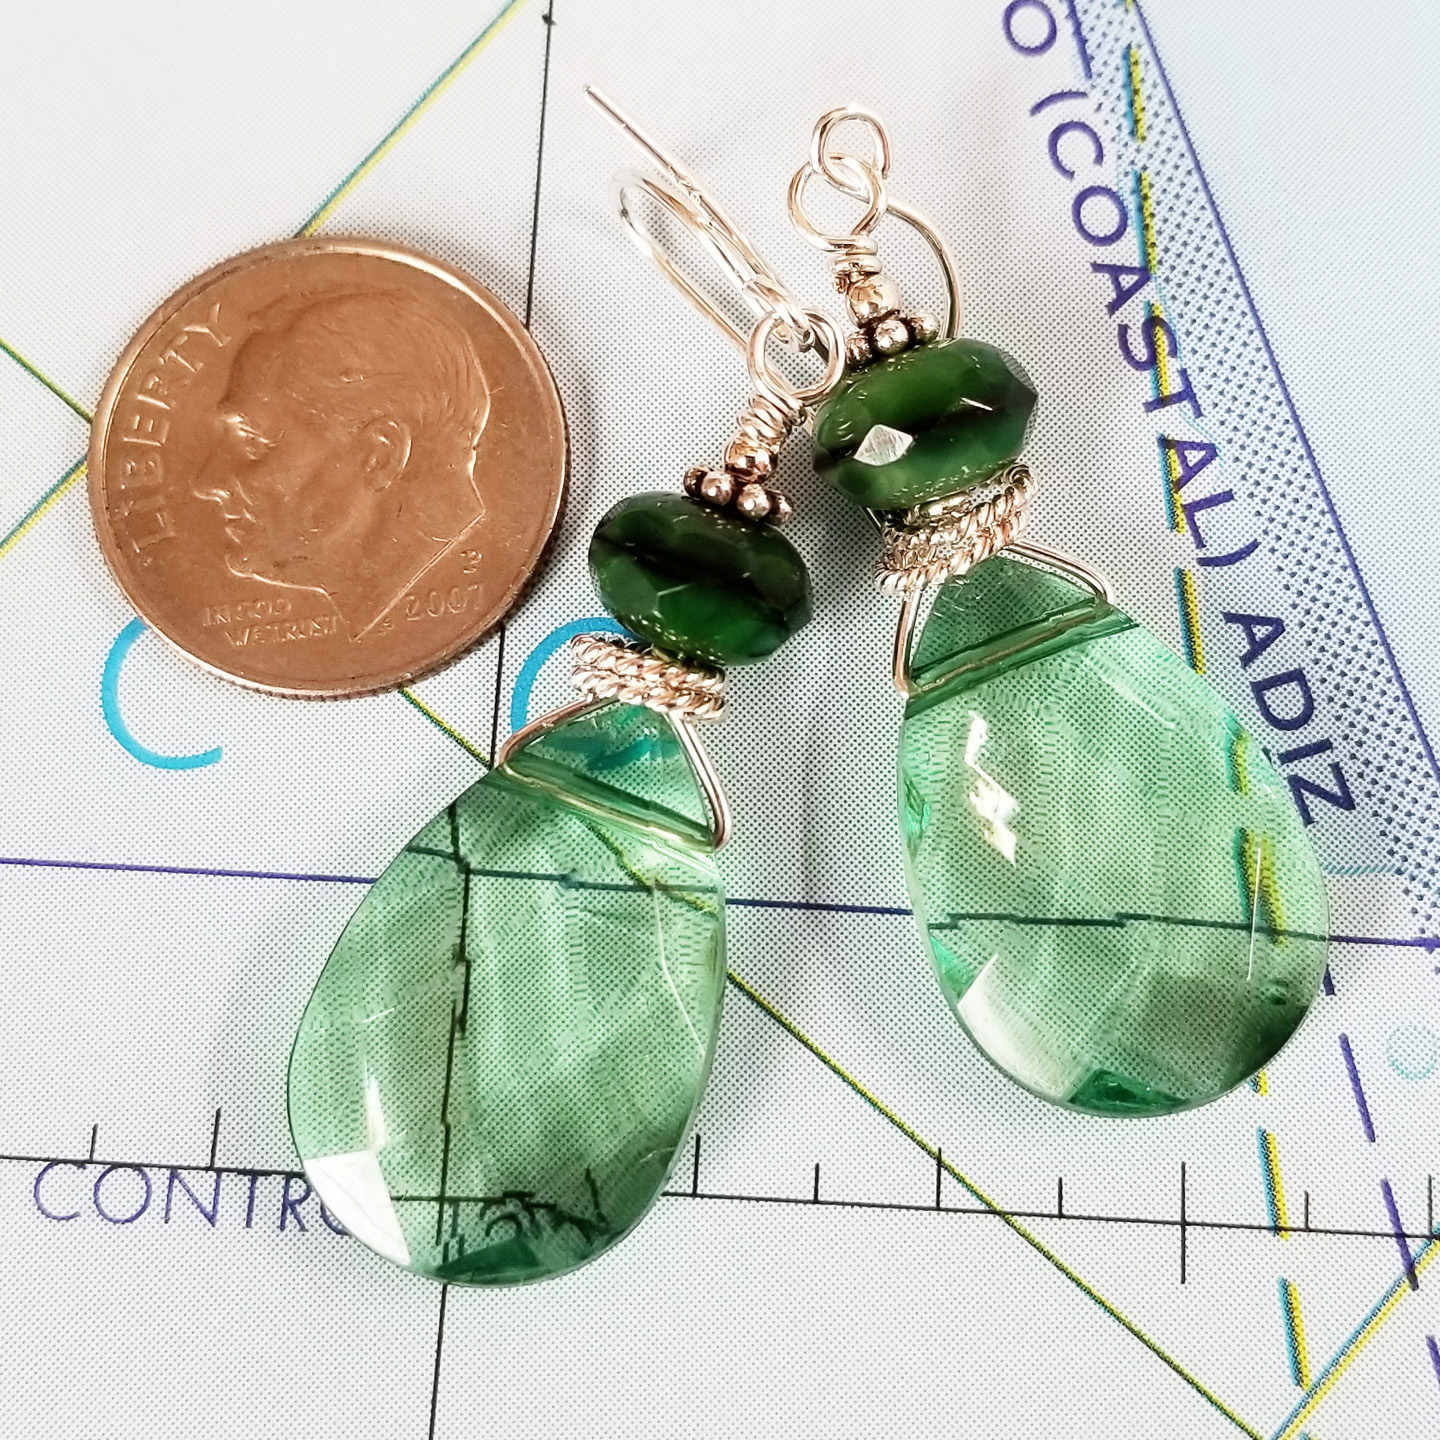 Grass Green Crystal and Sterling Earrings